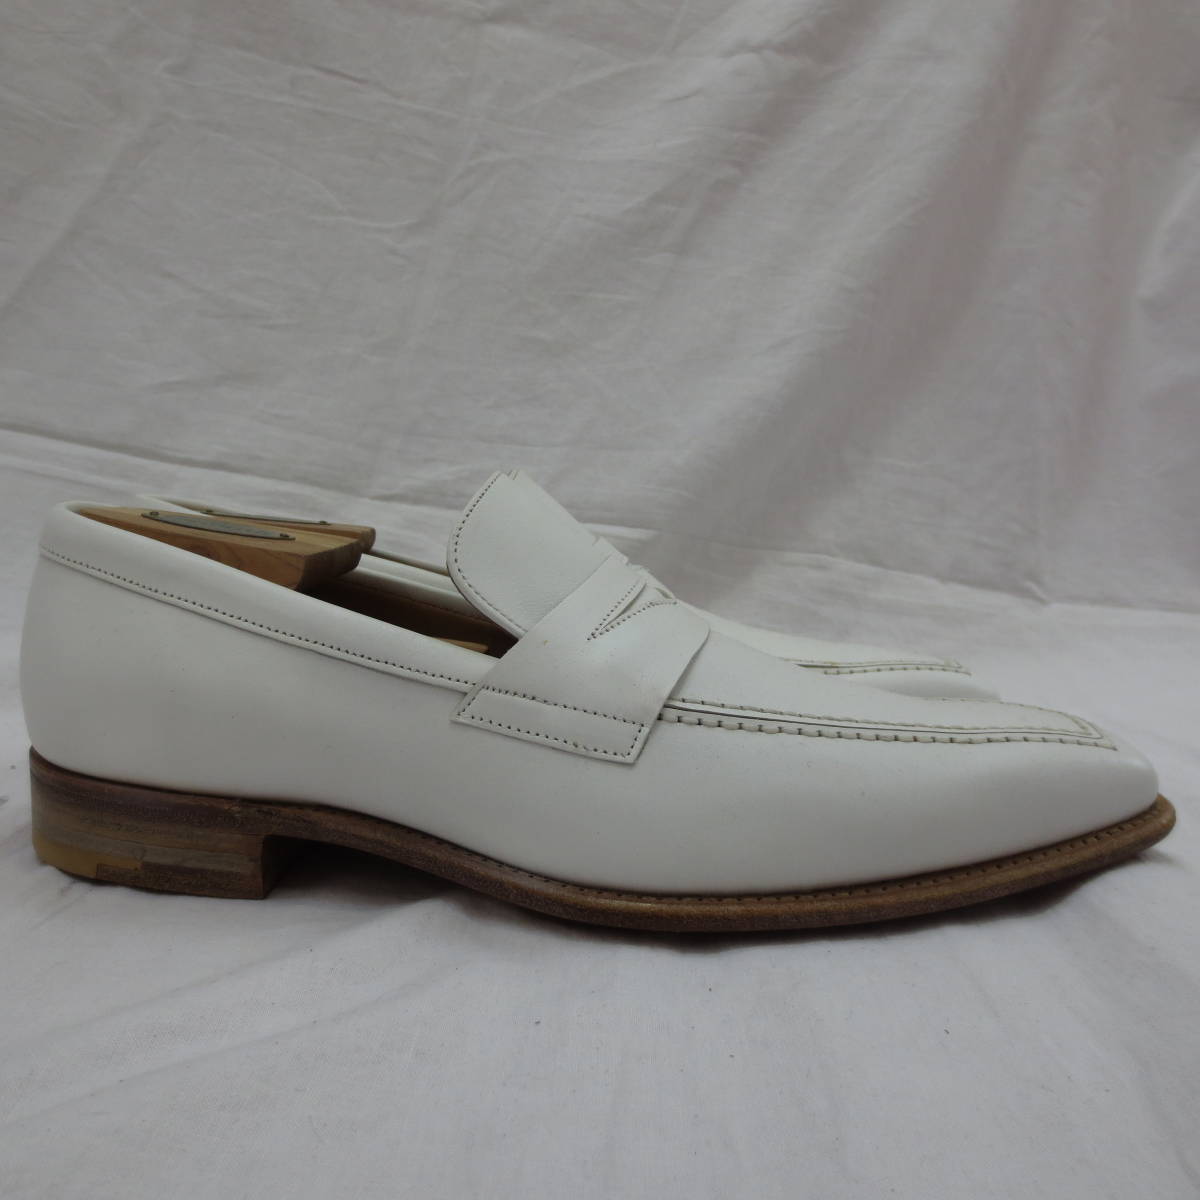 Paul Smith LOAFER shoes WHITE COLOR ポールスミス ローファー Made in ENGLAND 最高級品 参考定価80000円 本物 UK7_画像6